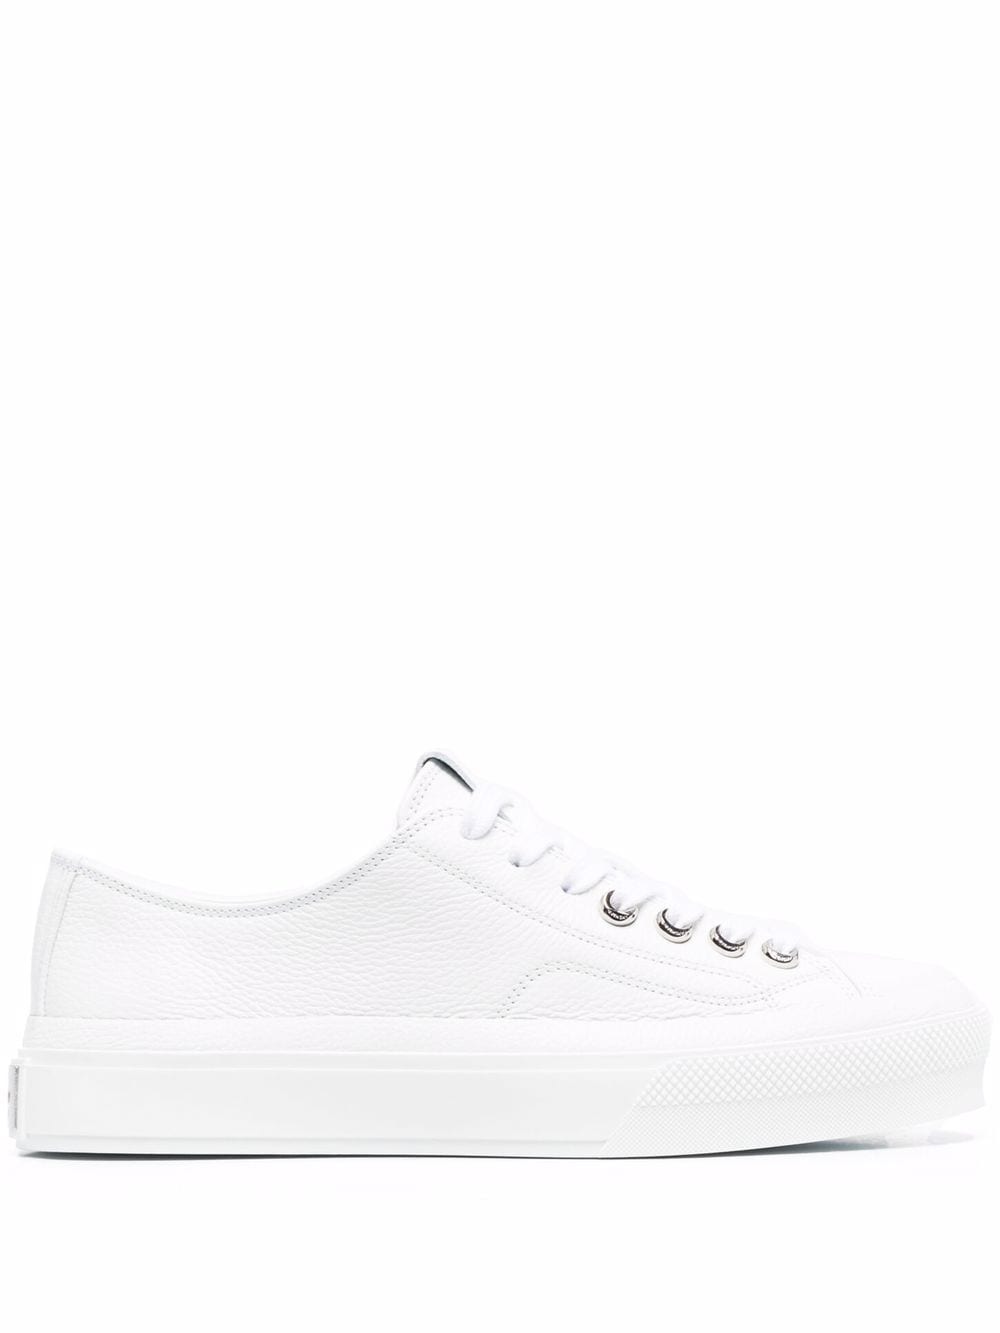 City Low Leather Sneakers дамски обувки Givenchy 840754807_35_5